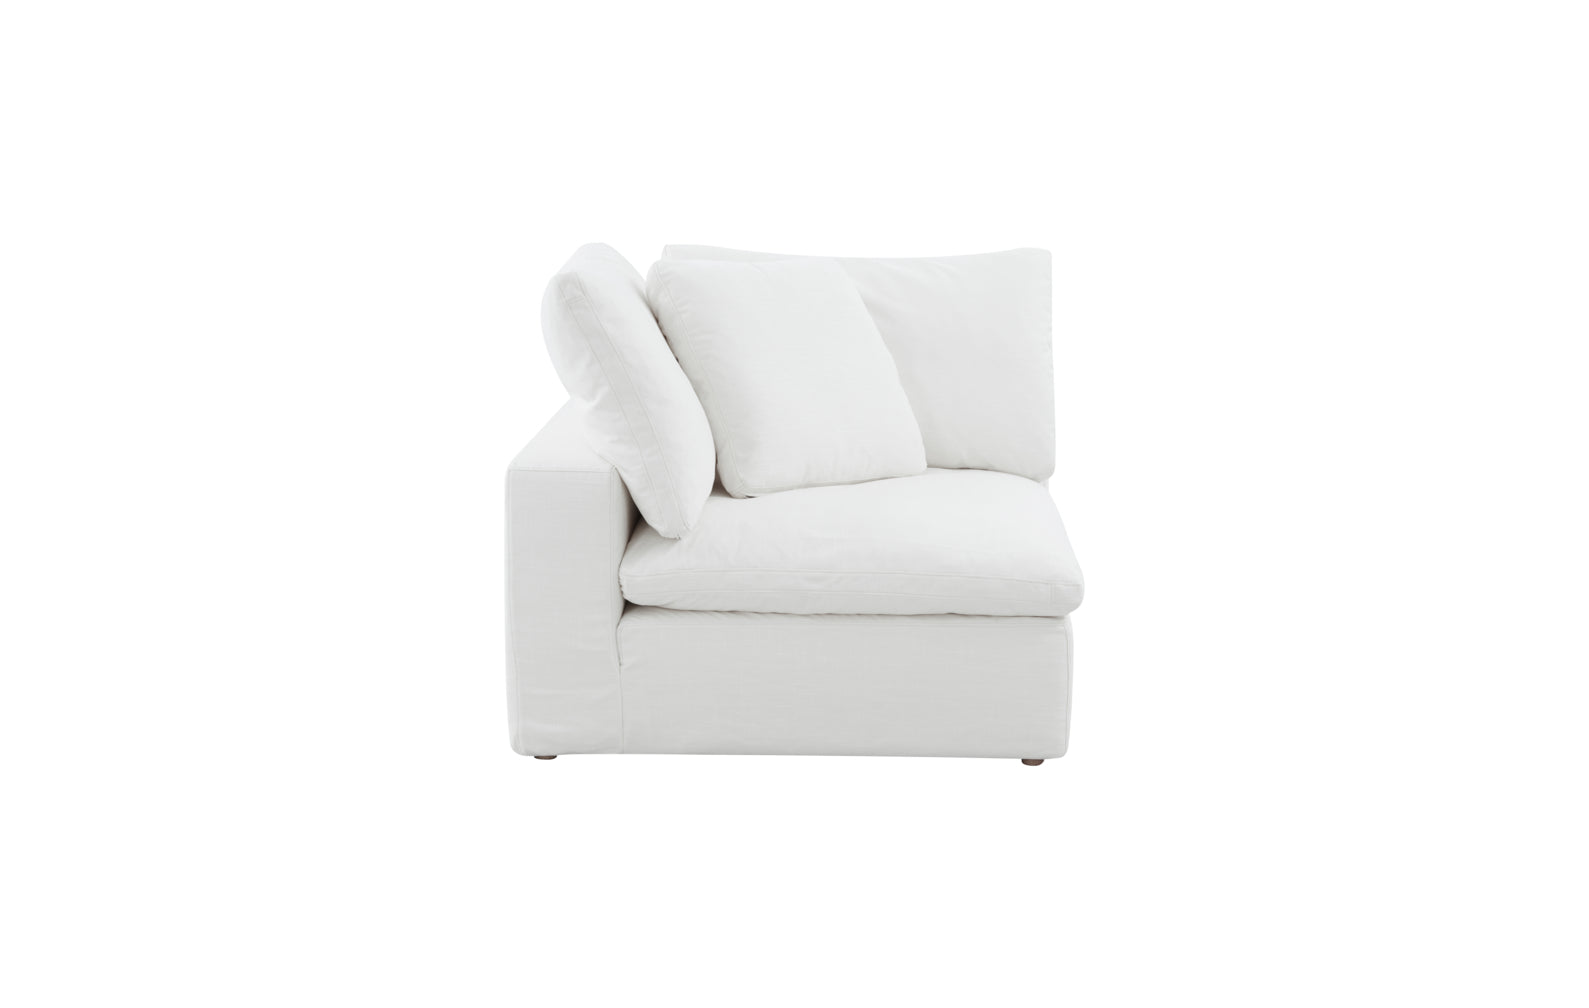 Movie Night™ Corner Chair, Large, Brie (Left or Right) - Image 5